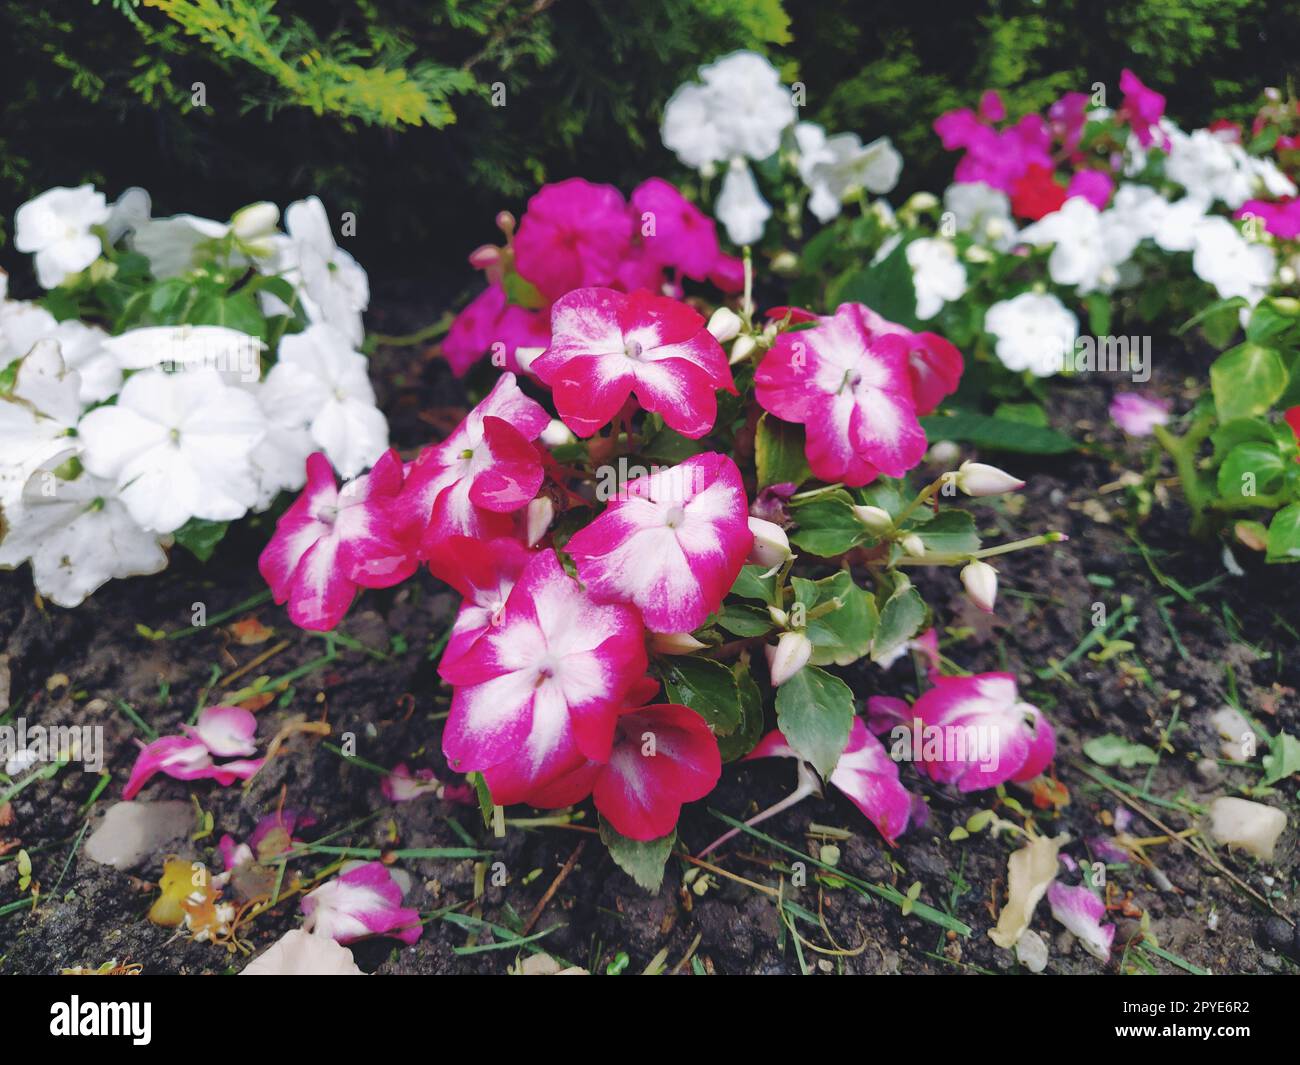 Petunia is a genus of herbaceous or semi-shrub perennial plants of the Solanaceae family. An ornamental variety grown as an annual, Petunia hybrida, or Petunia garden. White and pink striped flowers Stock Photo